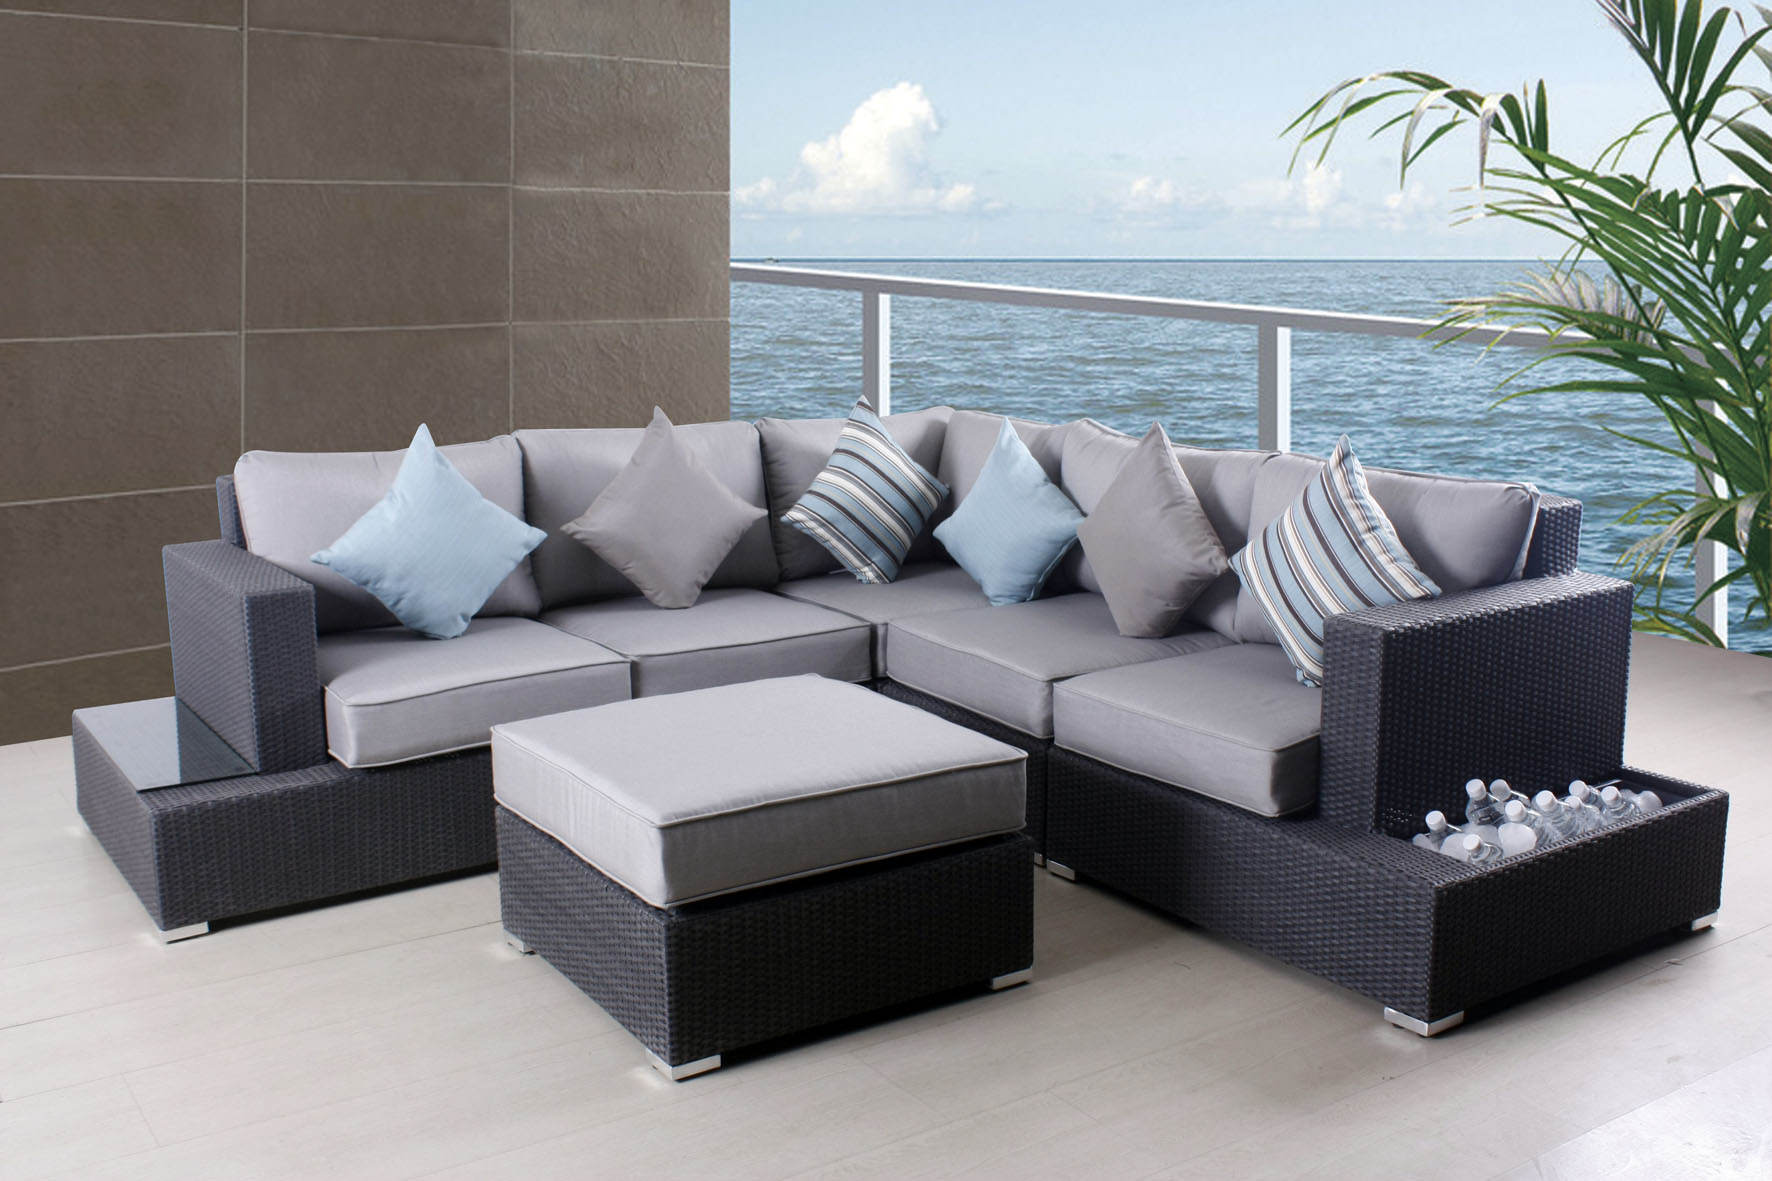 Image of: Barcalounger Outdoor Furniture